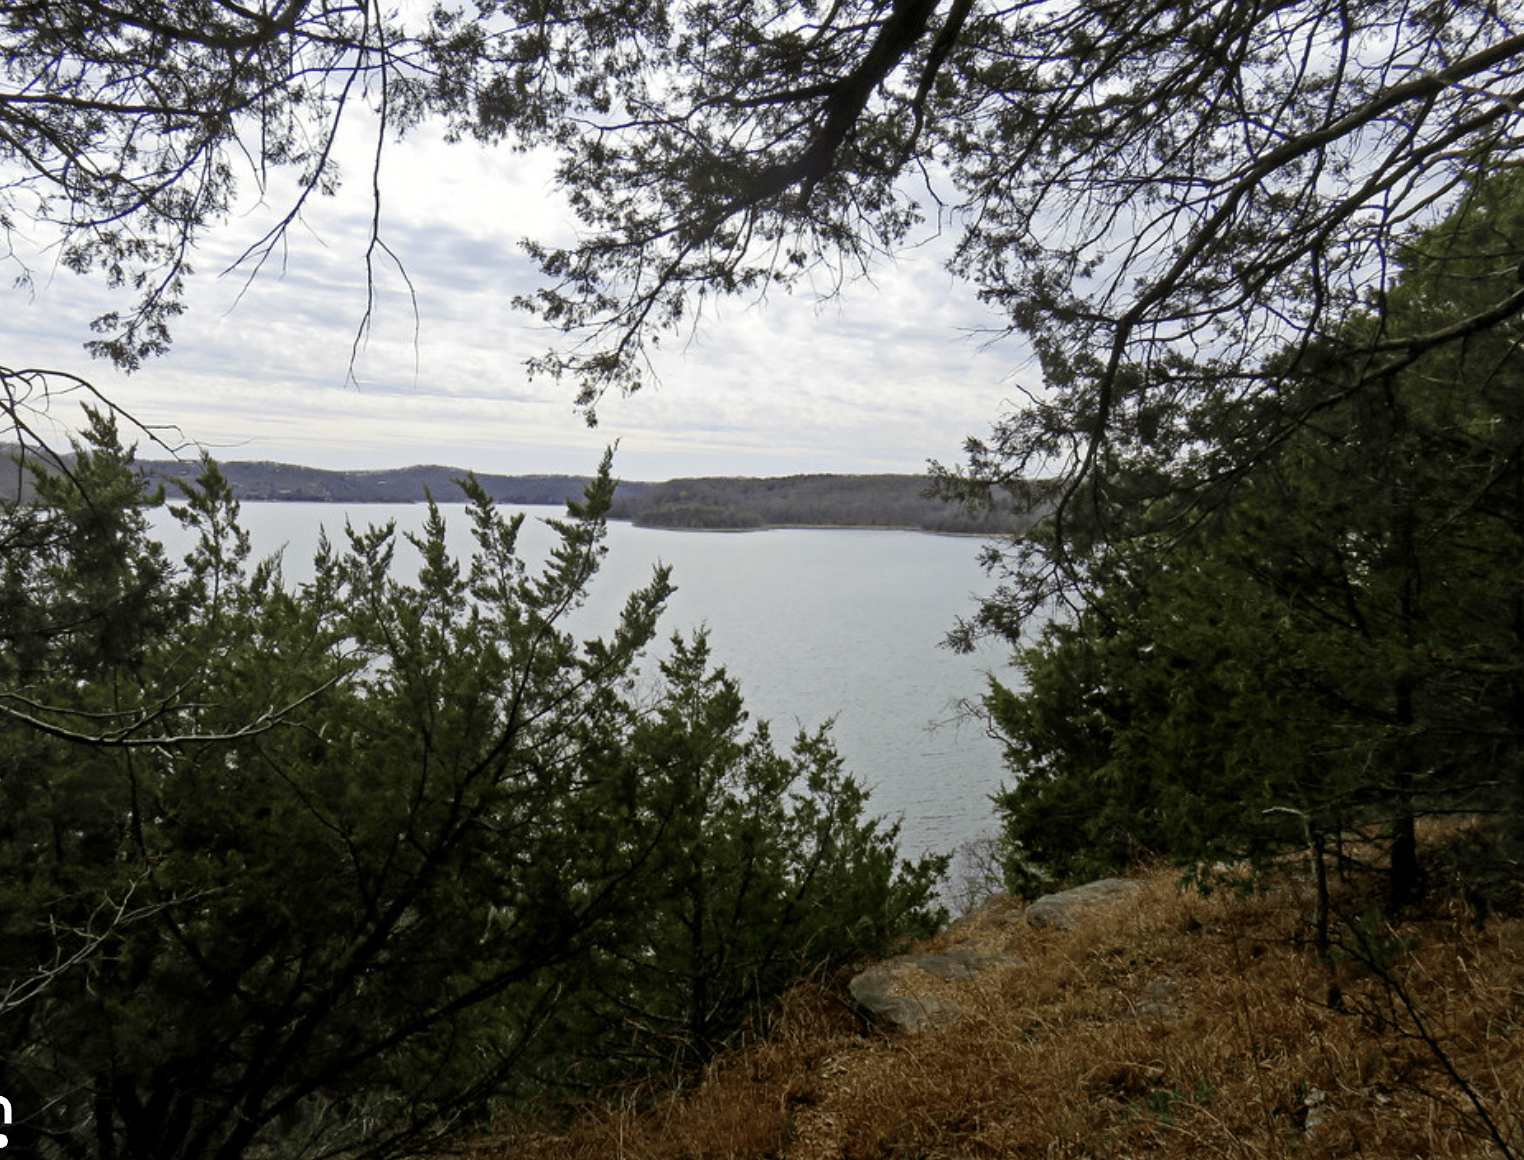 View of a lake in the Ozarks